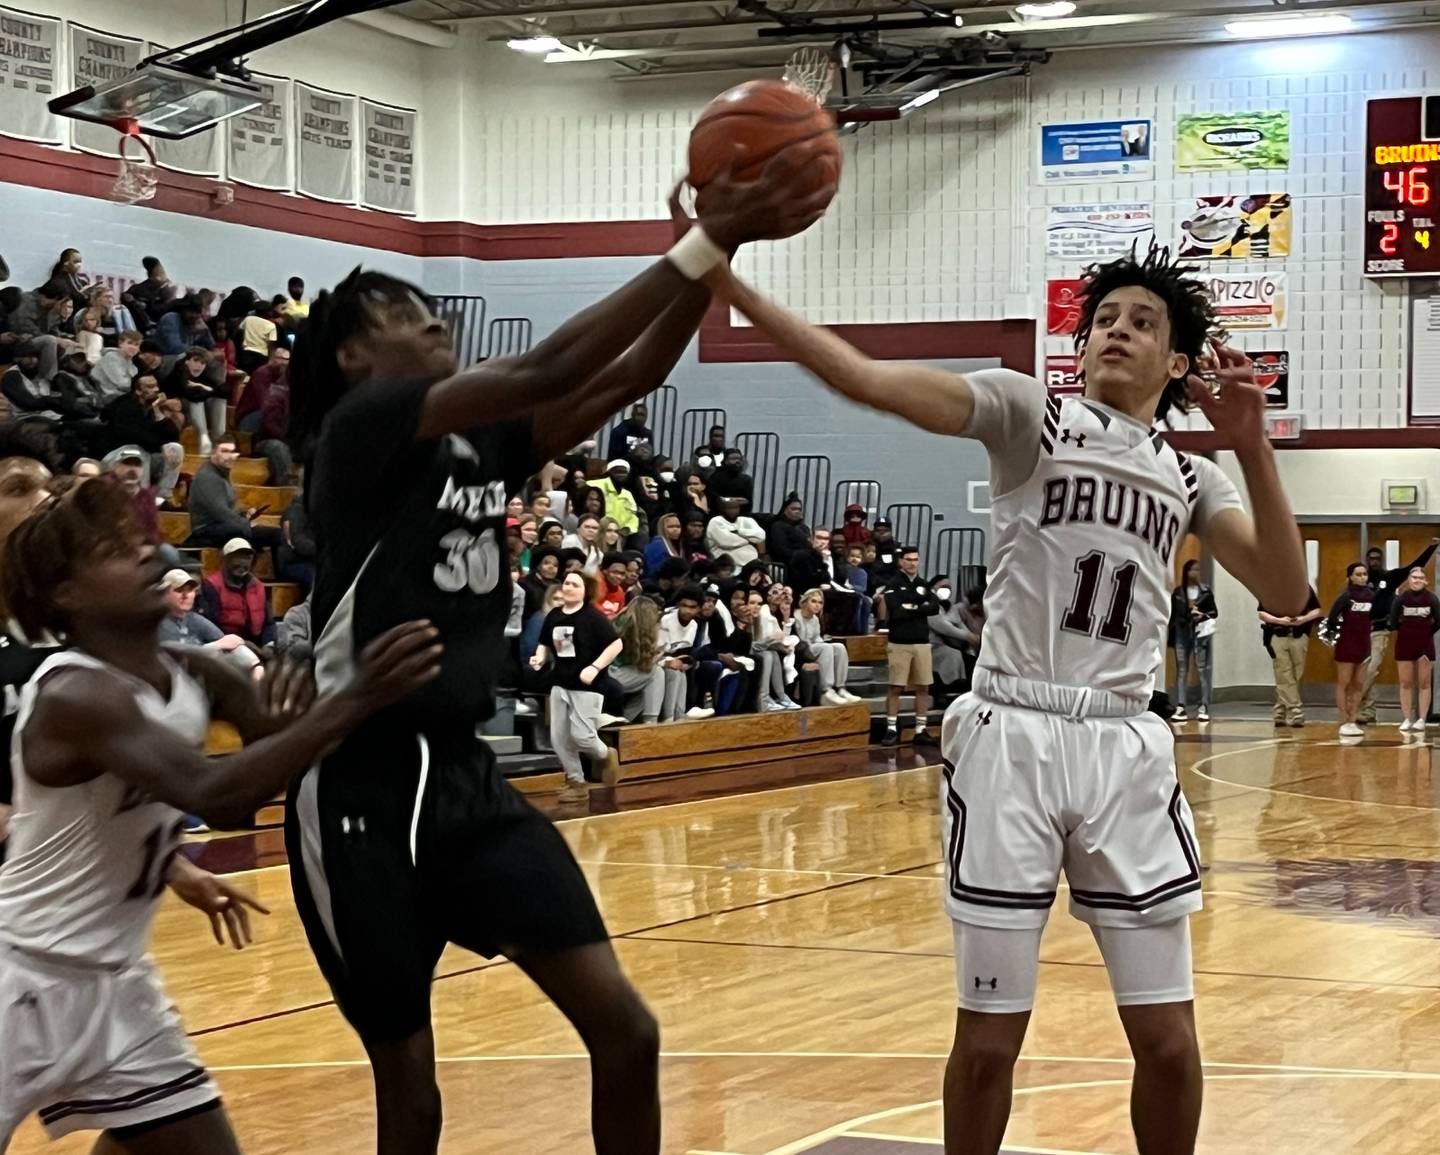 Meade's Shaun Jones (left) and Broadneck's Jordan Brown vie for a rebound during Wednesday's key Anne Arundel County boys basketball contest. The Bruins dominated the No. 14 Mustangs in the second half en route for a 58-42 victory in Cape St. Claire.